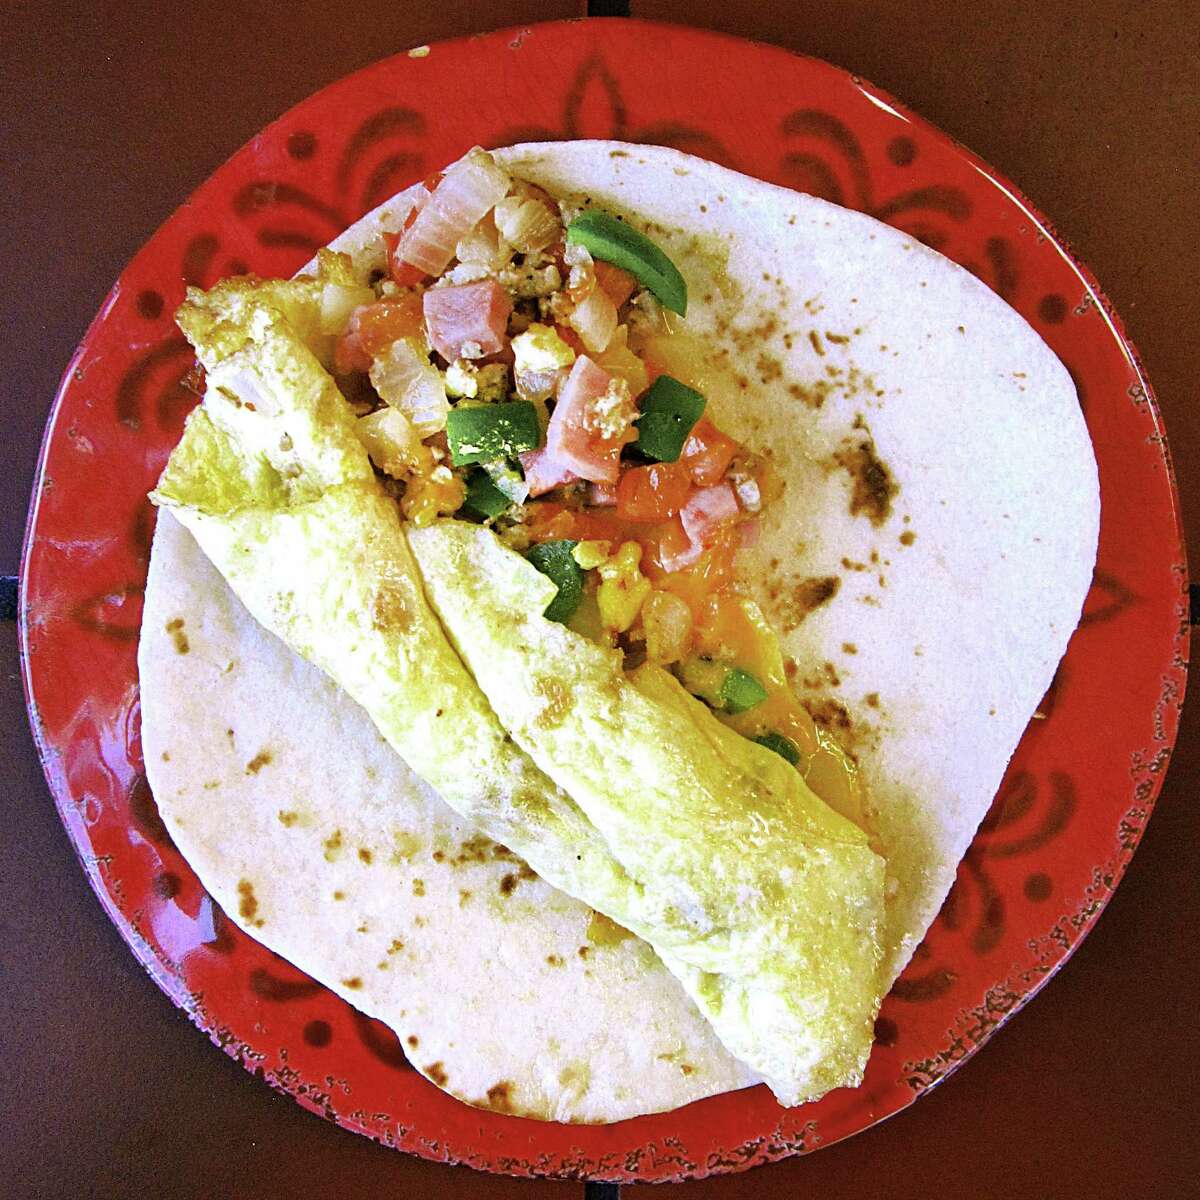 Omelet breakfast taco with eggs, ham, sausage, peppers, onions, tomatoes and cheese on a handmade flour tortilla from Ruthie's Mexican Restaurant.